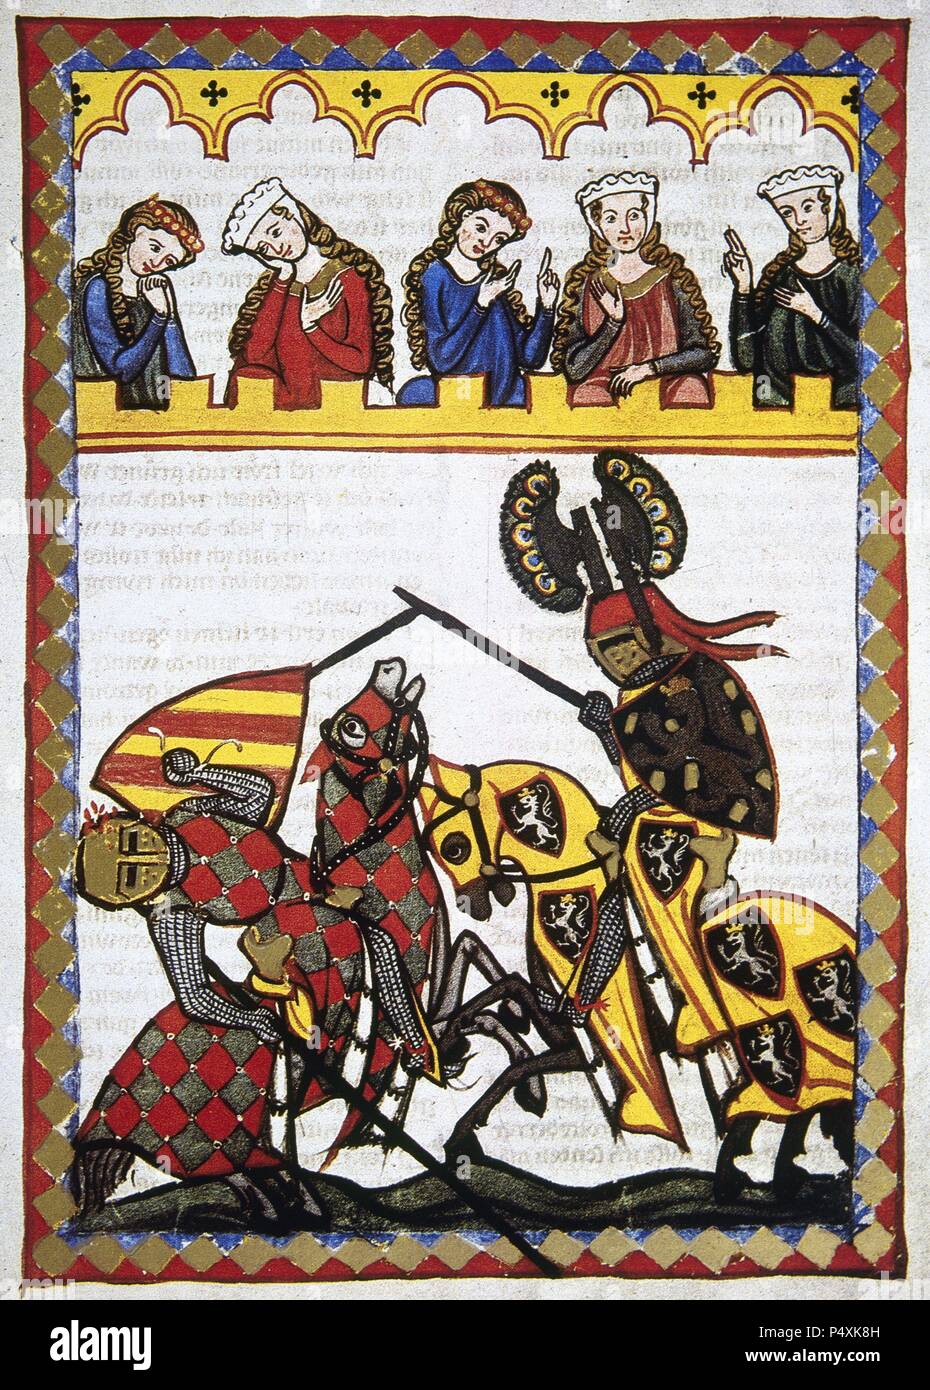 The Thurgau poet Walter von Klingen  (1240-1286), Knight of Rudolf I of Habsburg, defeats another knight in a tournament. Codex Manesse (ca.1300) by Rudiger Manesse and his son Johannes. Miniature. Folio 52r. University of  Heidelberg. Library. Germany. Stock Photo